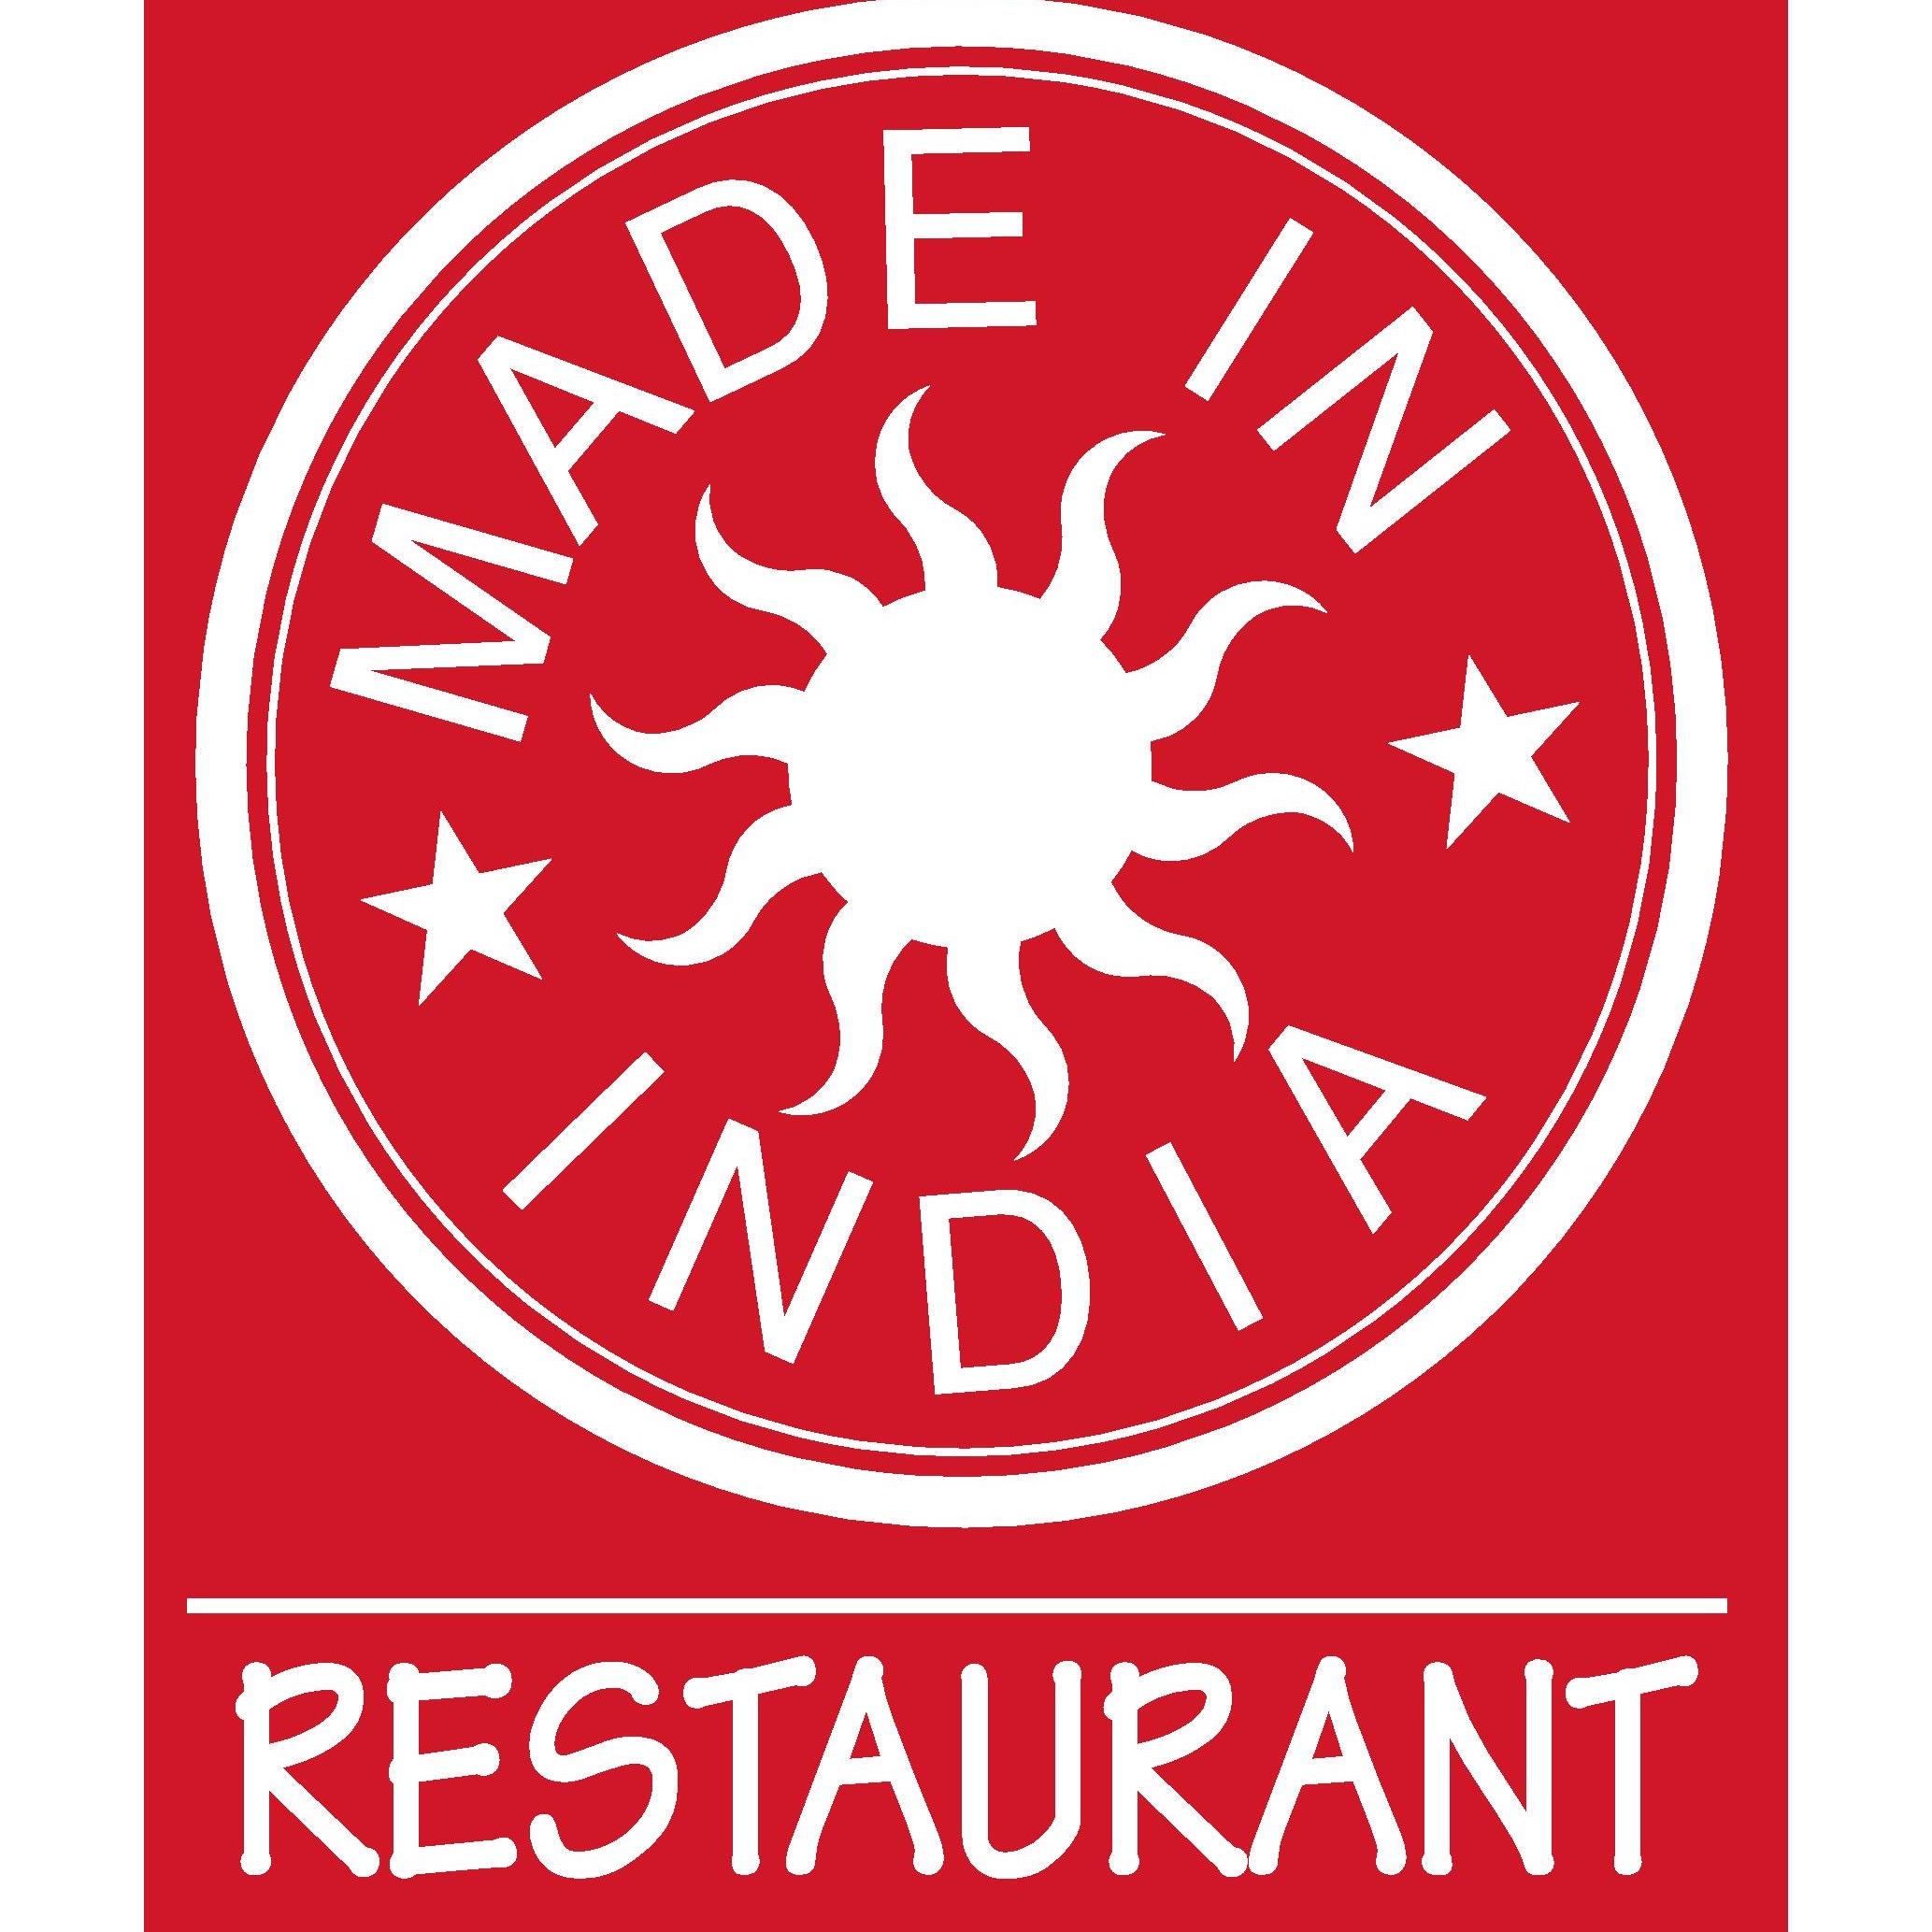 Made In India Restaurant is a family owned business, and after much research and planning we opened in January 2015in Kelowna.